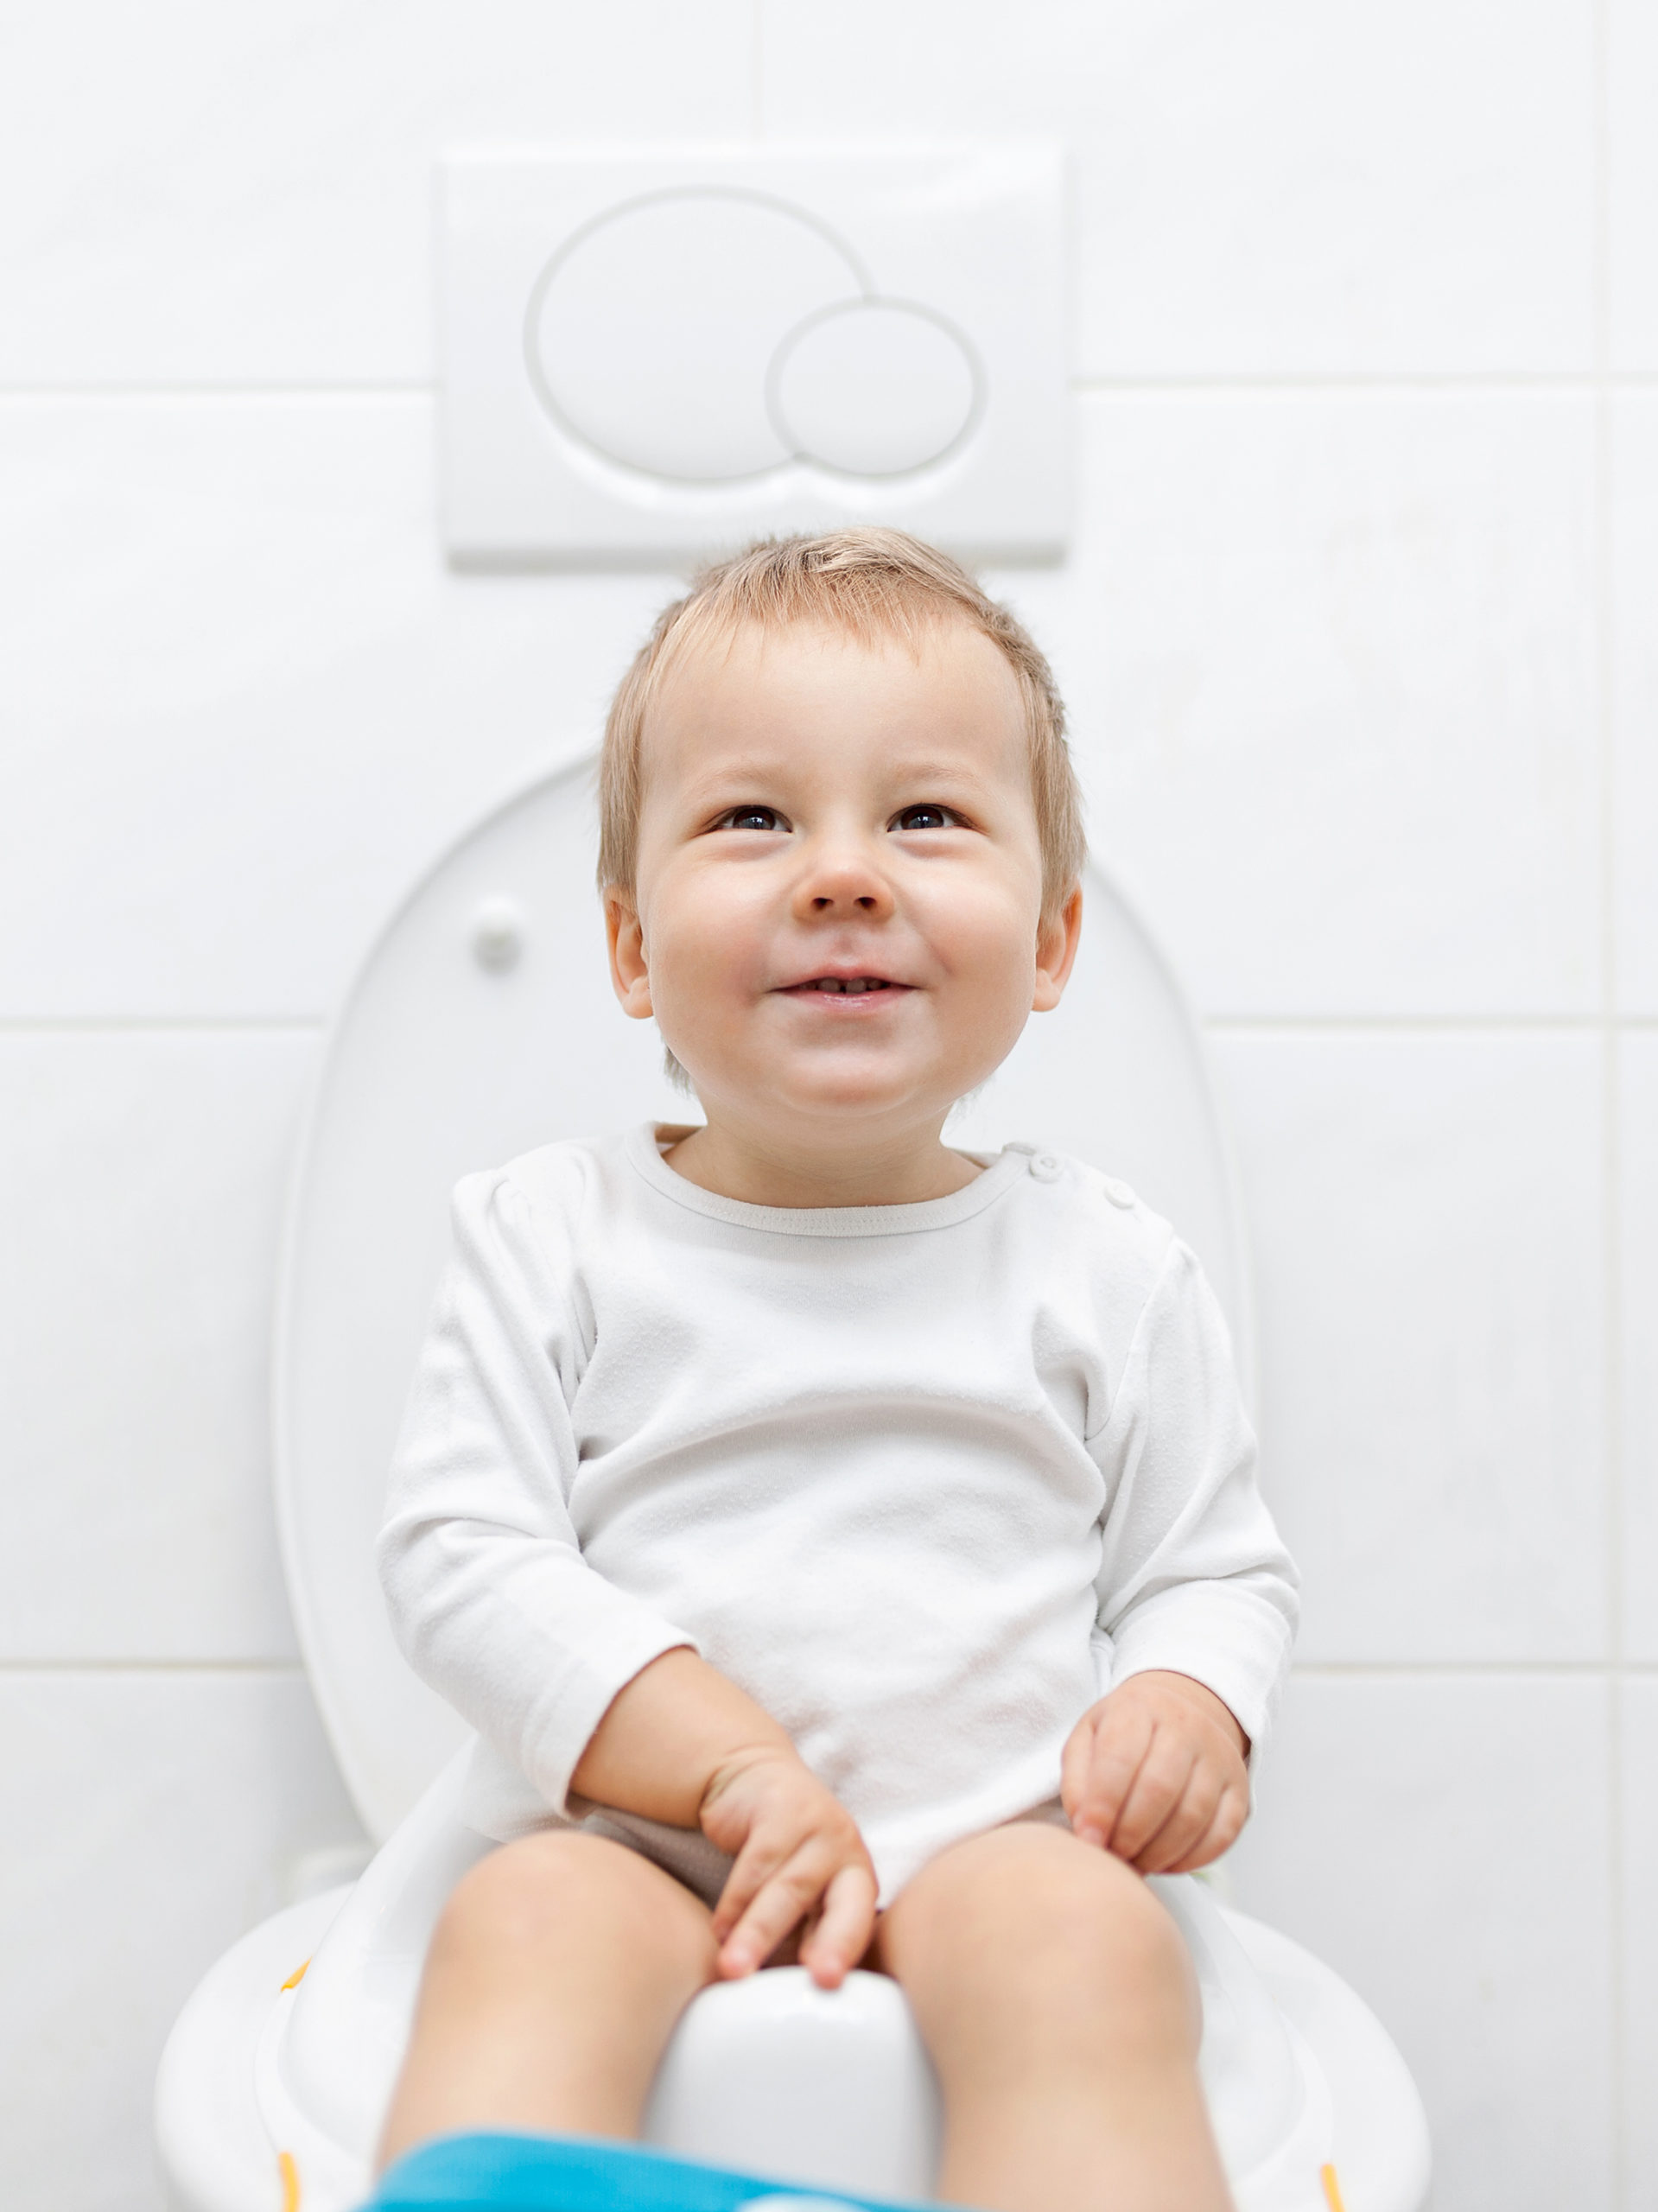 Your child’s poop: An ultimate guide